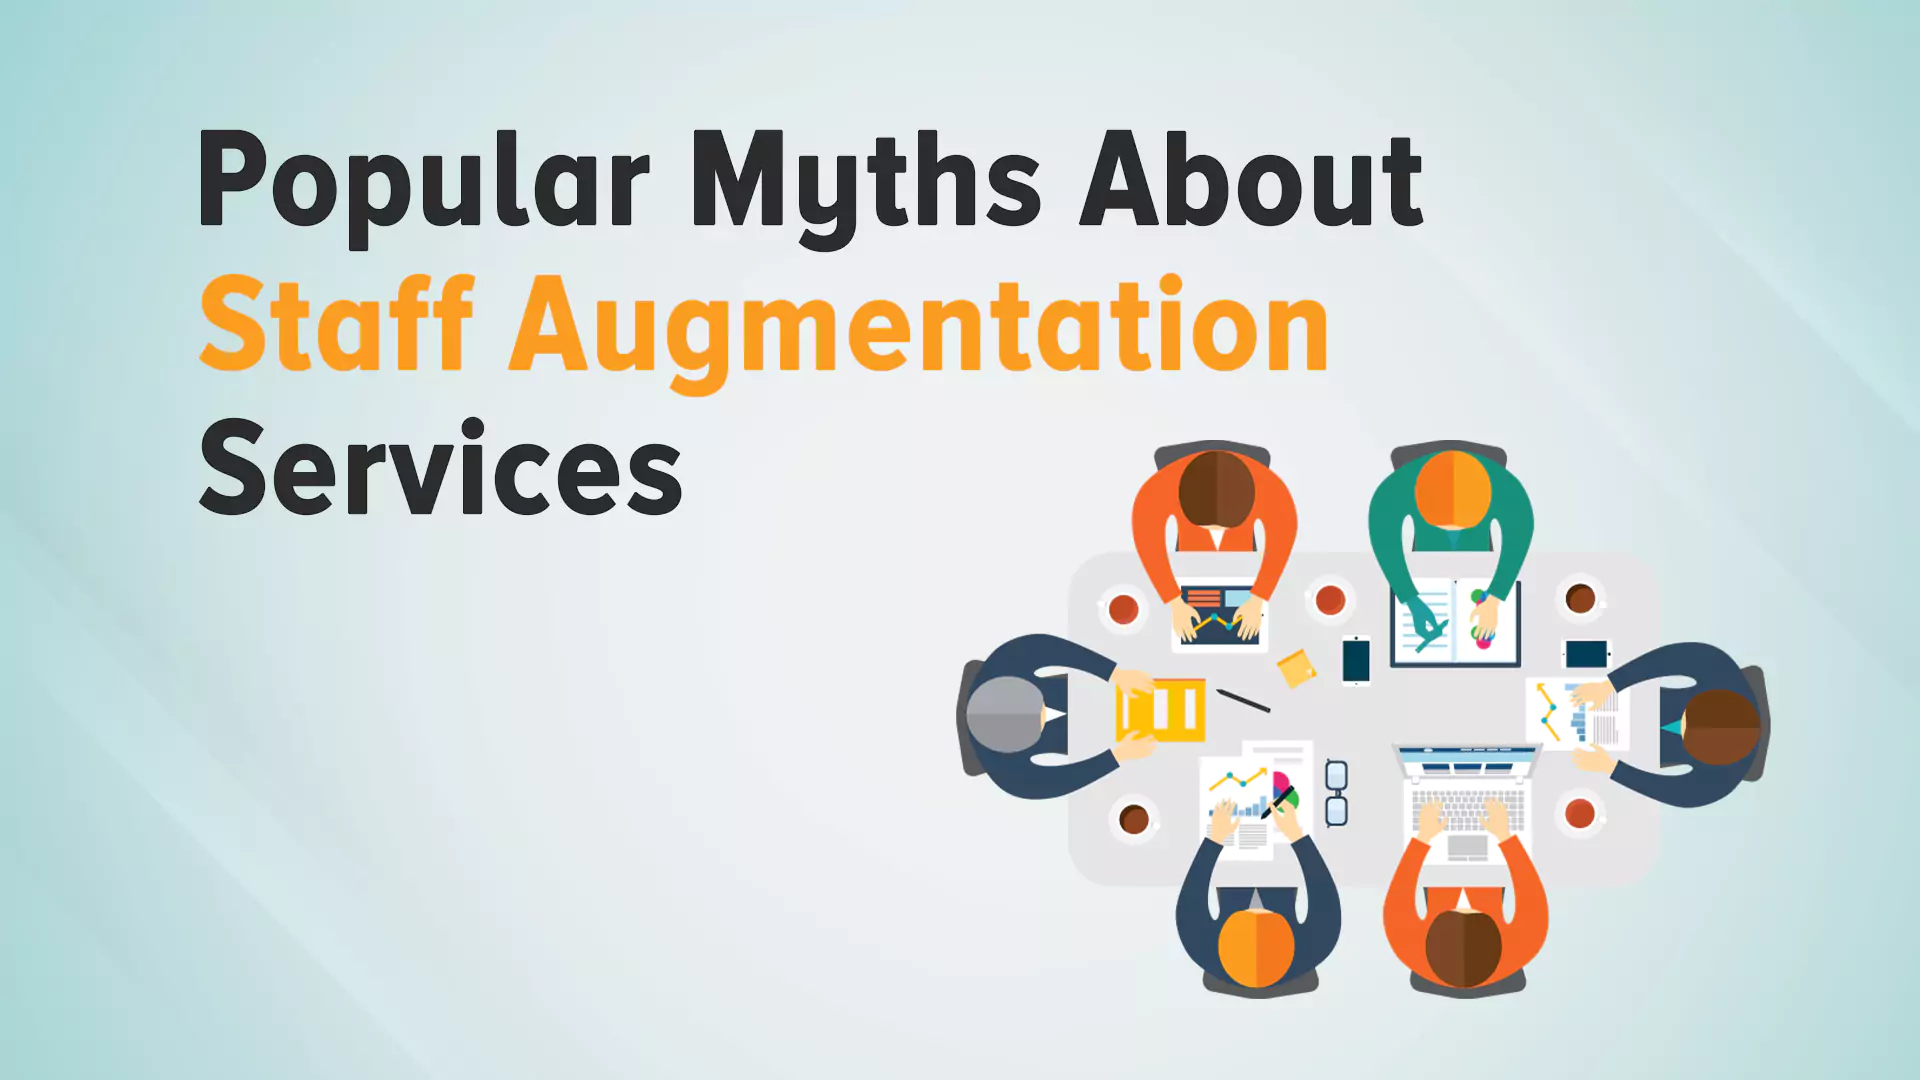 Popular Myths About Staff Augmentation Services